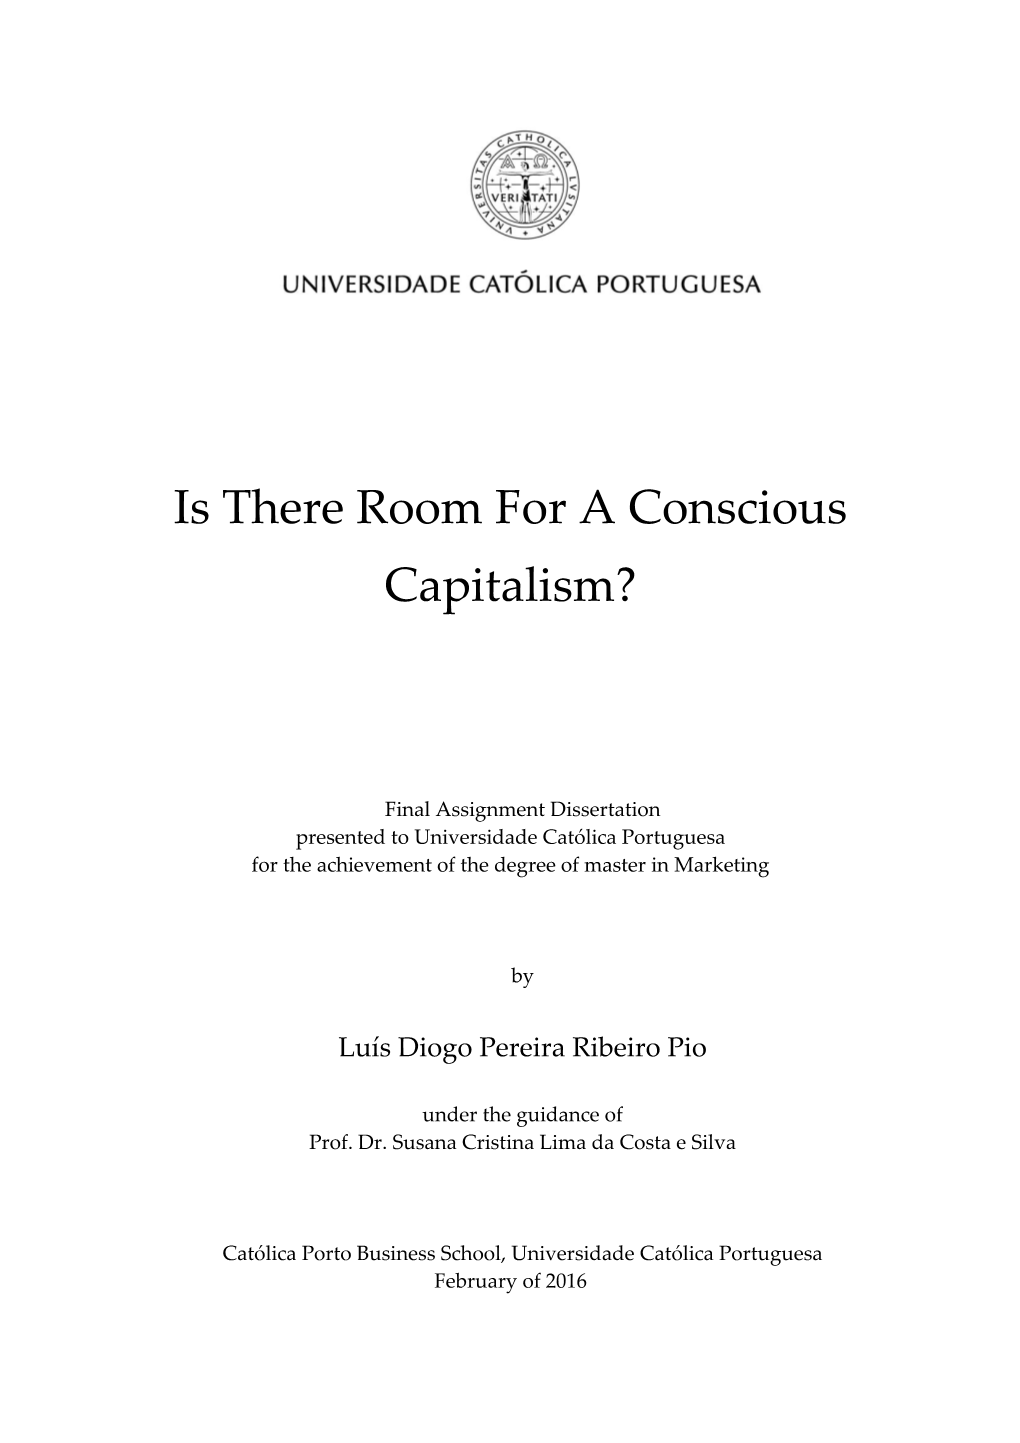 Is There Room for a Conscious Capitalism?